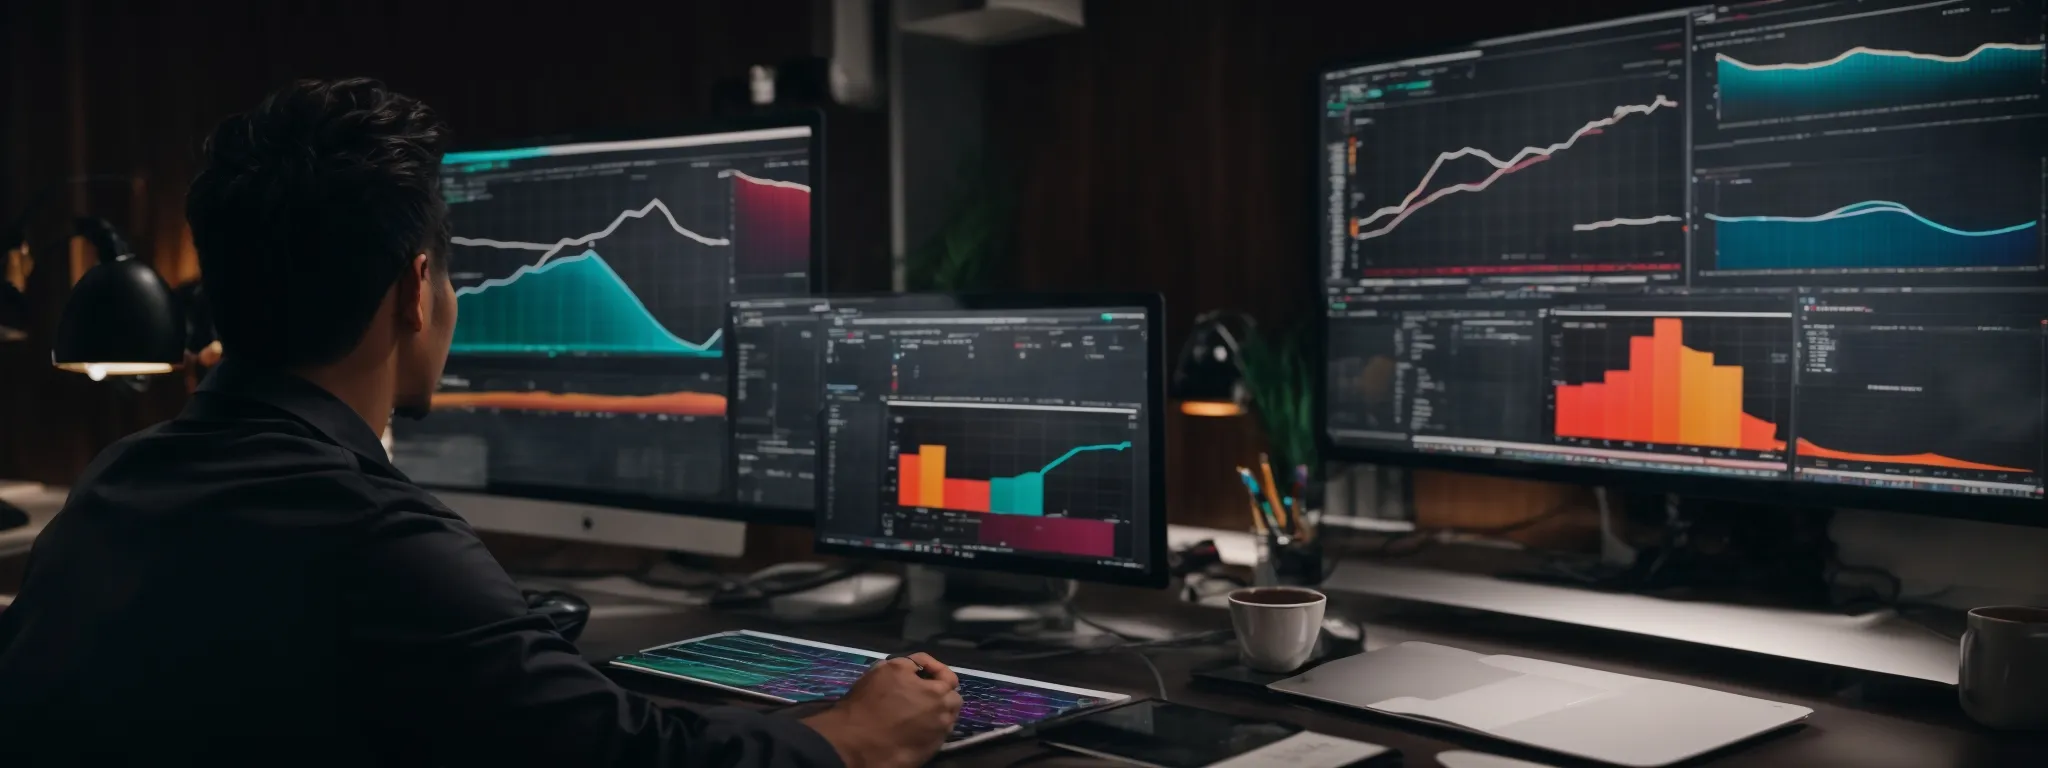 a marketer reviews colorful charts and graphs on a computer screen, analyzing seo performance.